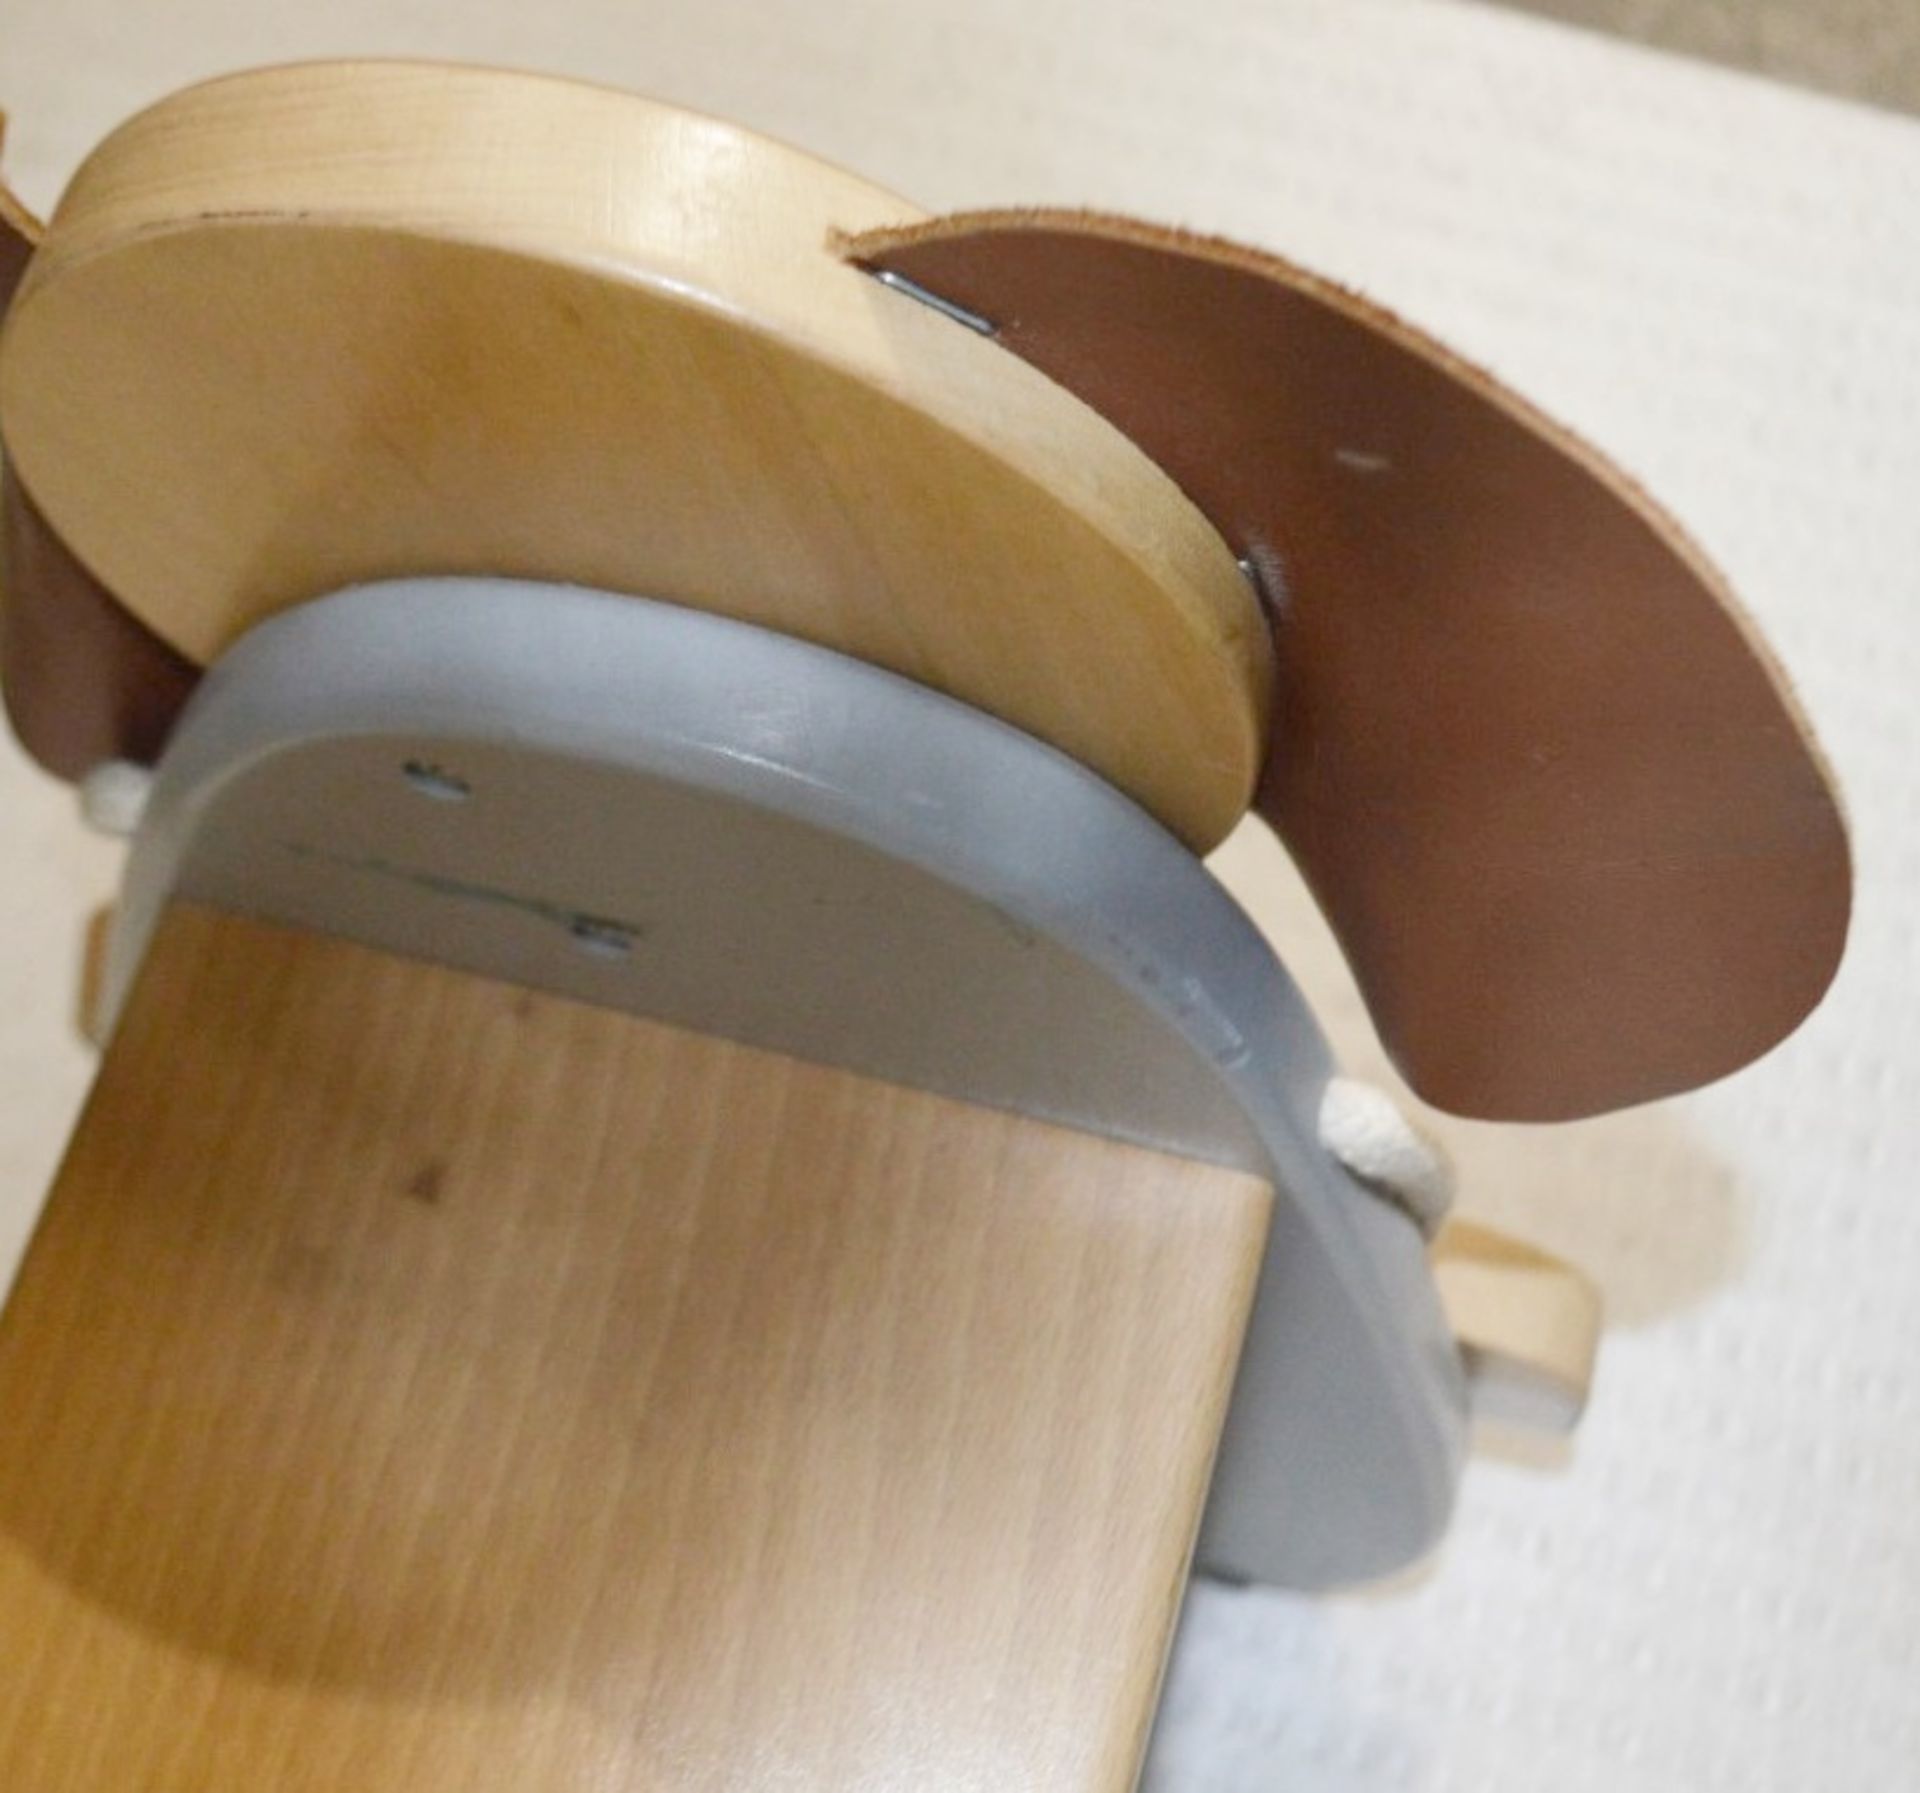 1 x Child's Solid Wood Stool / Shoe Step In The Style Of An Elephant With Real Leather Ears - A Very - Image 2 of 6